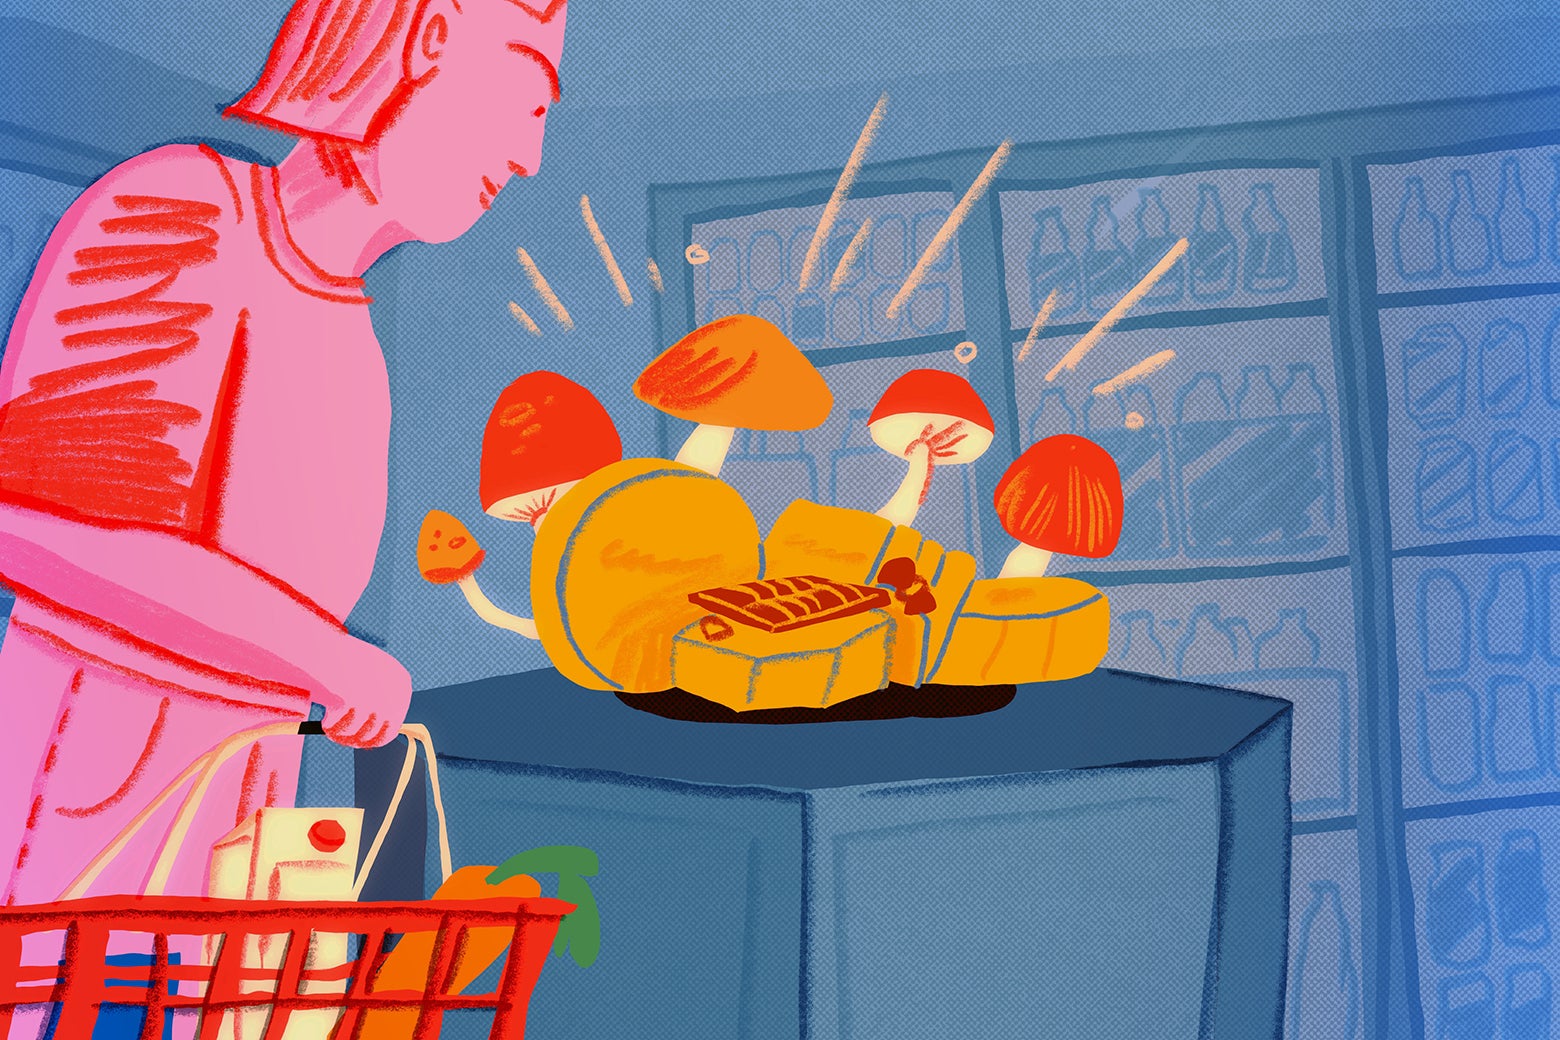 An illustration of a shopper looking at mushrooms.